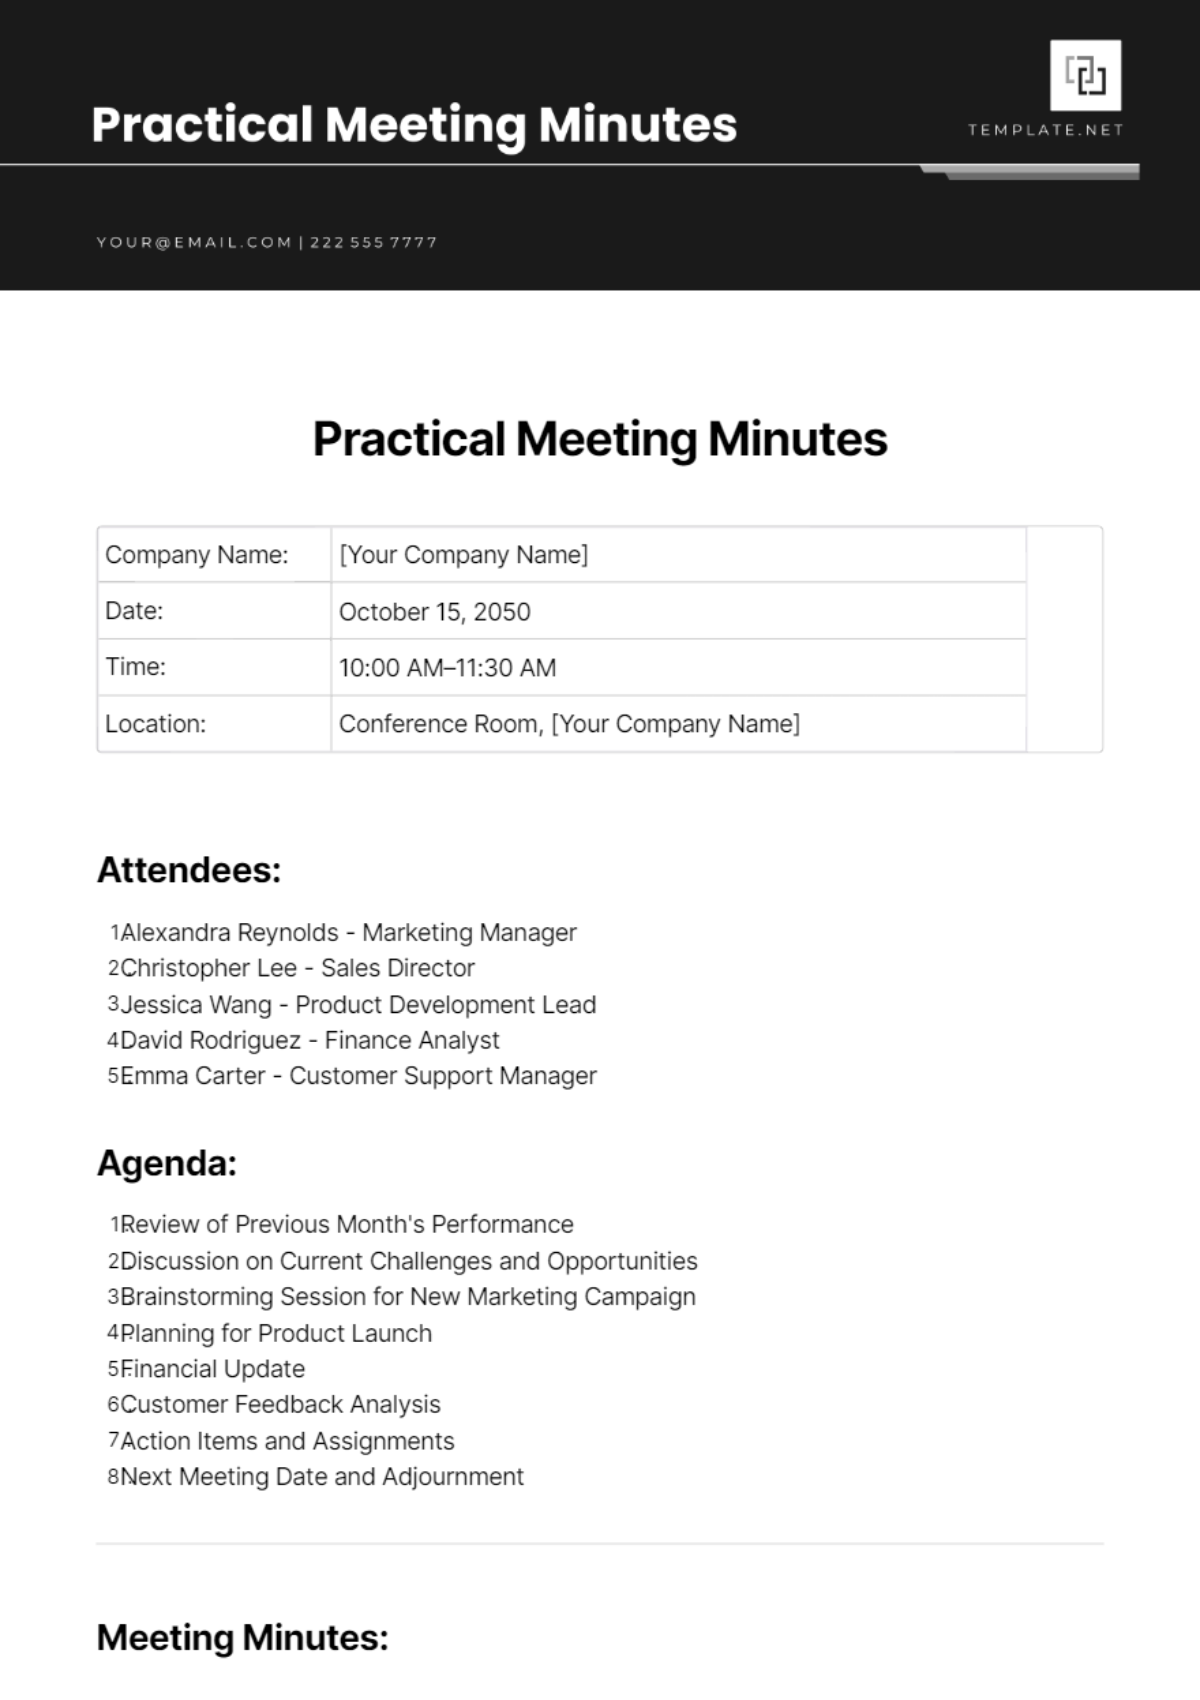 Practical Meeting Minutes Template